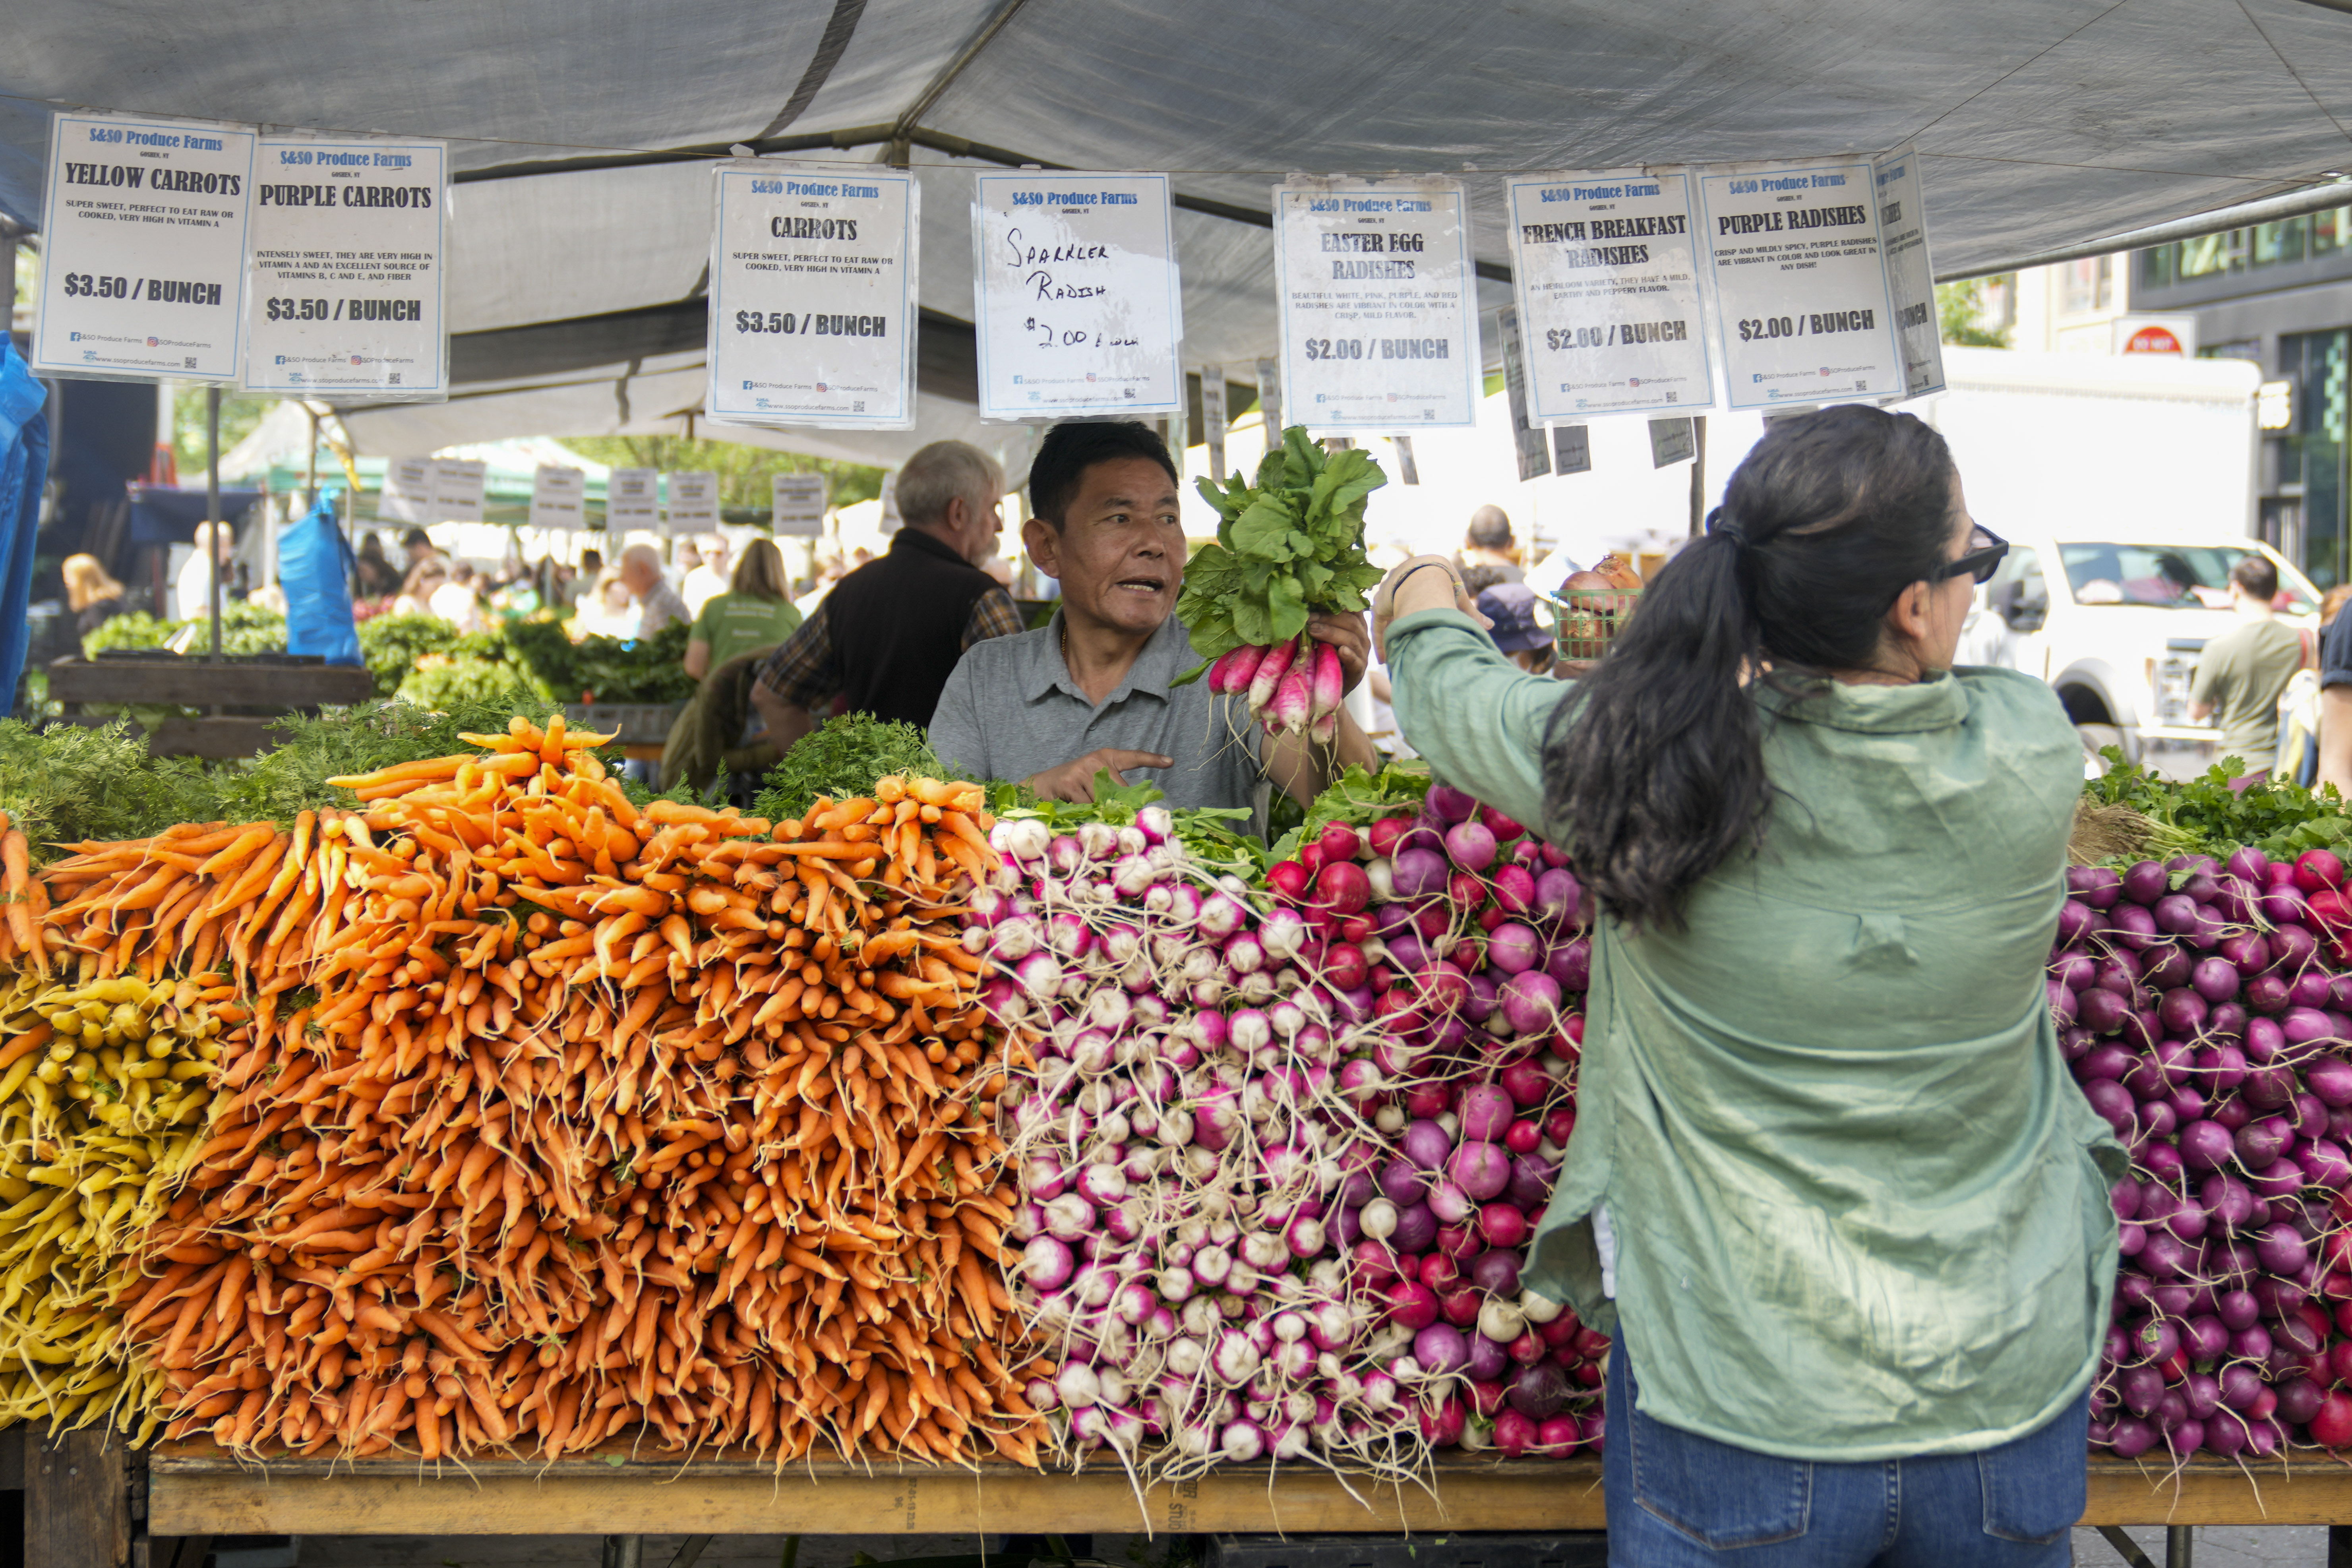 Farmers markets thrive as customers and vendors who latched on